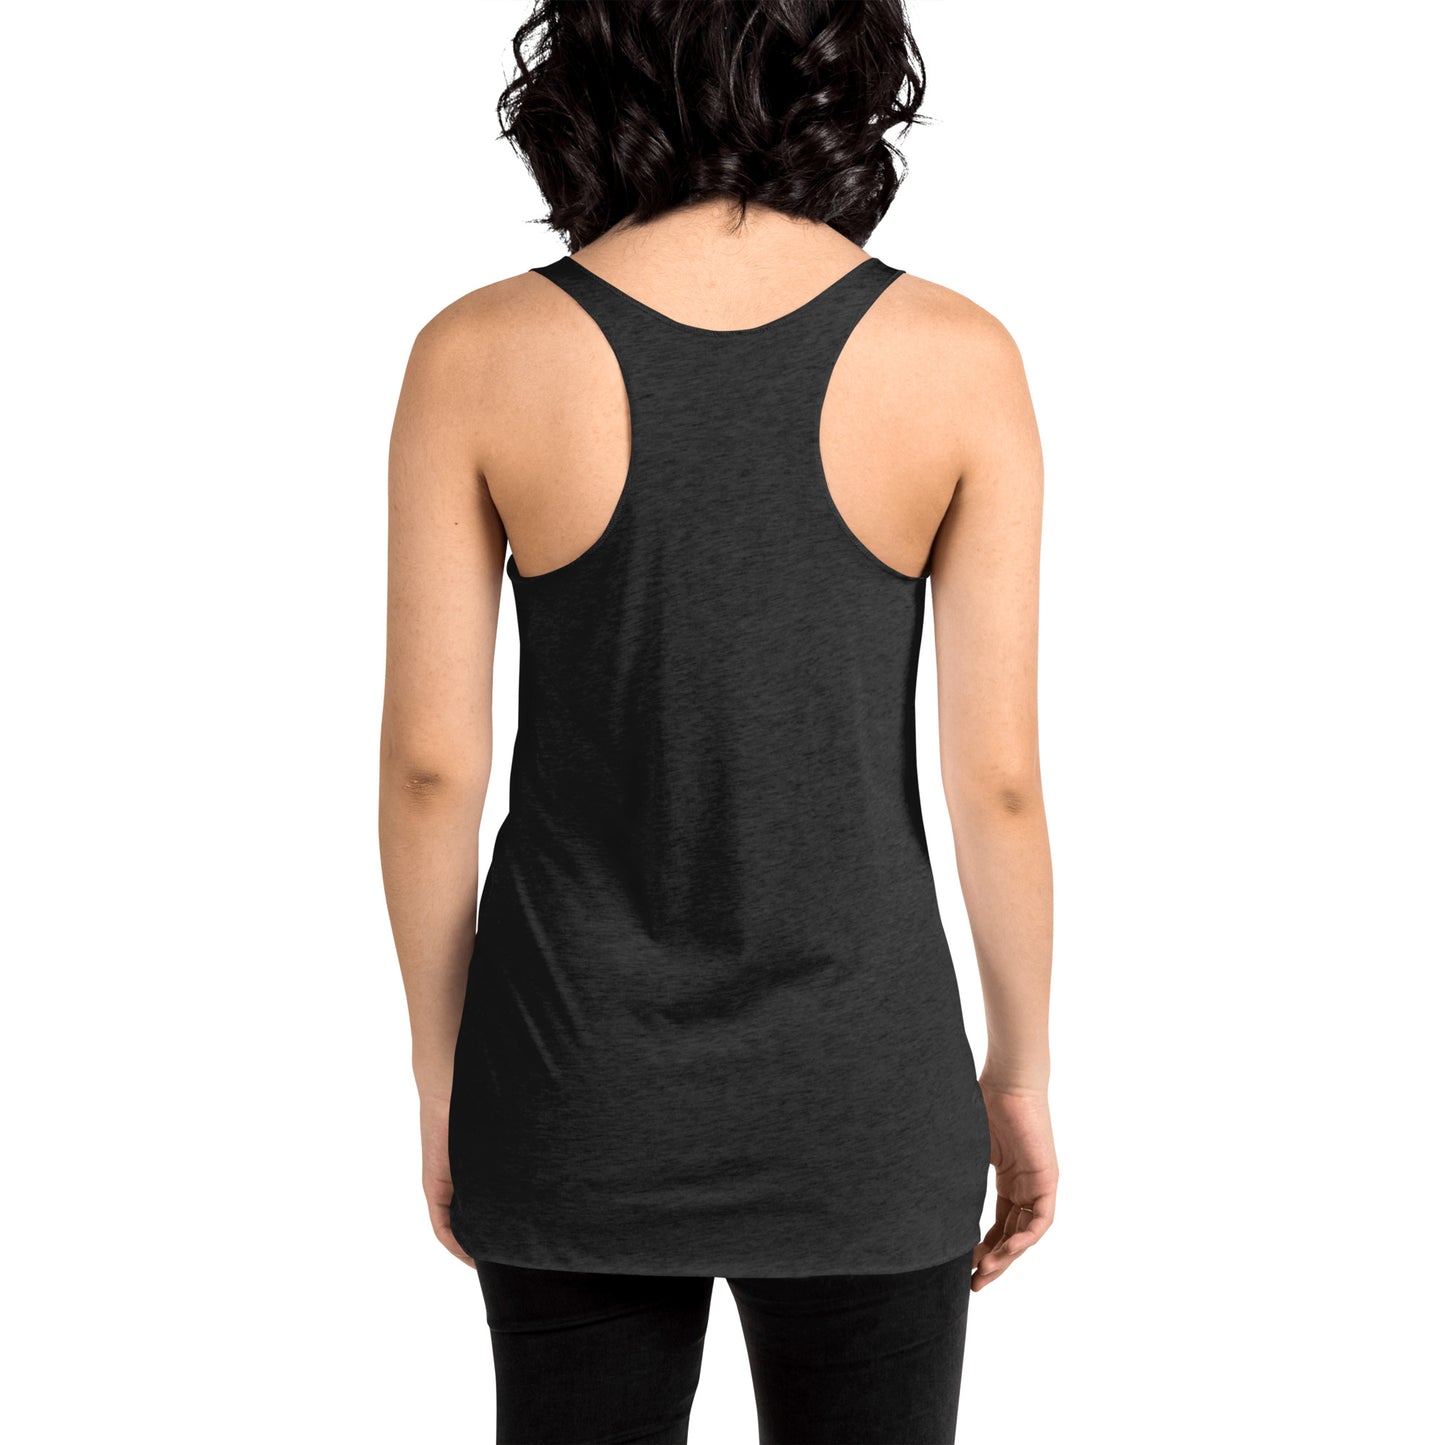 Touch the moon Women's Racerback Tank streetwear and workout